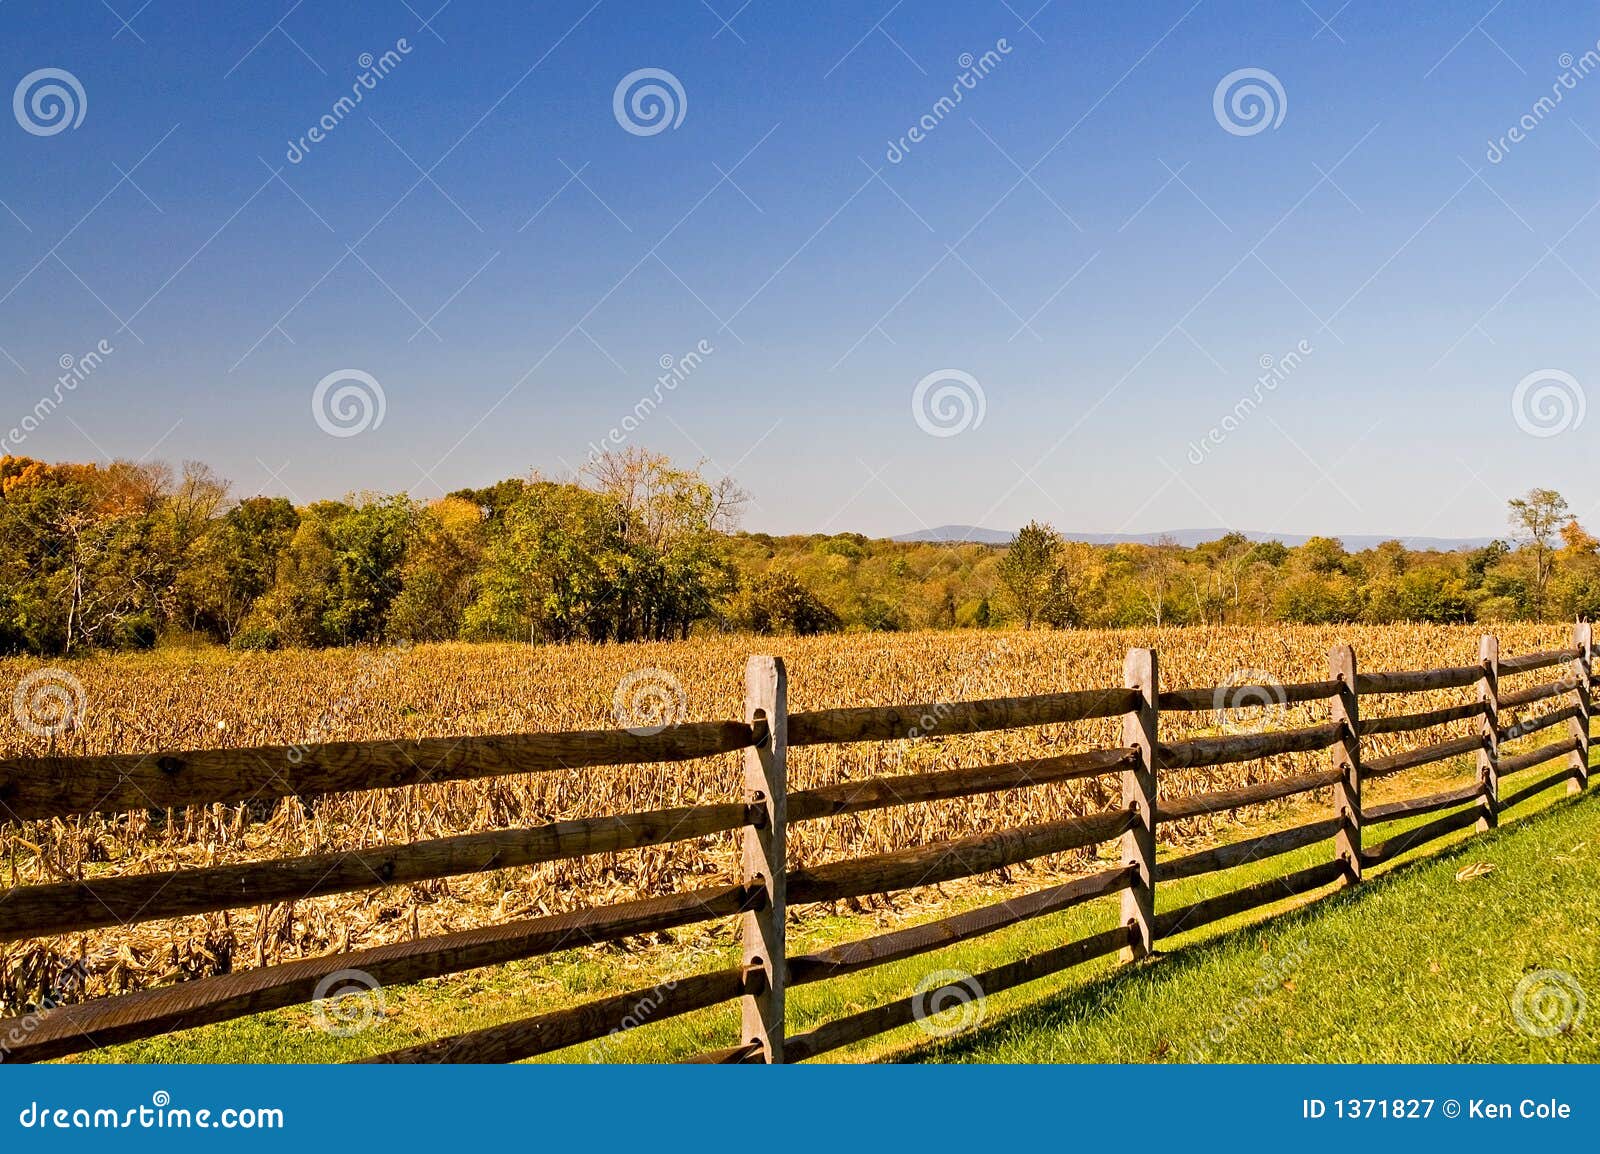 fence and fall cornfield